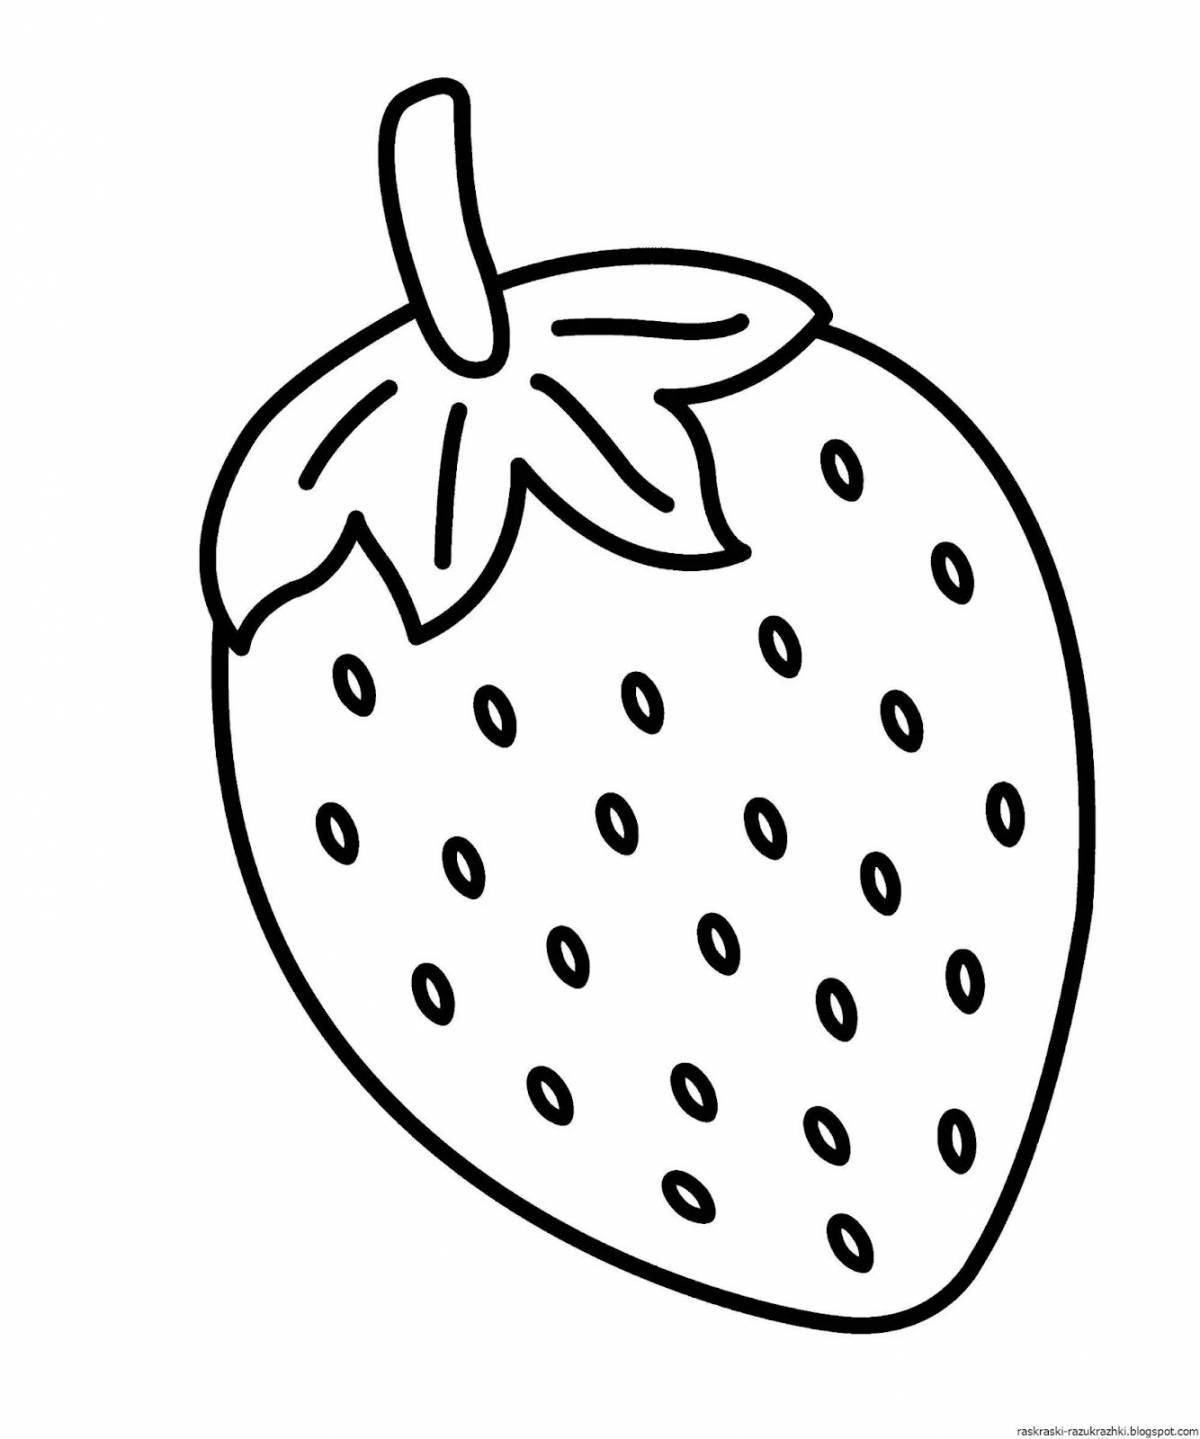 Gourmet berries and fruits coloring book for kids